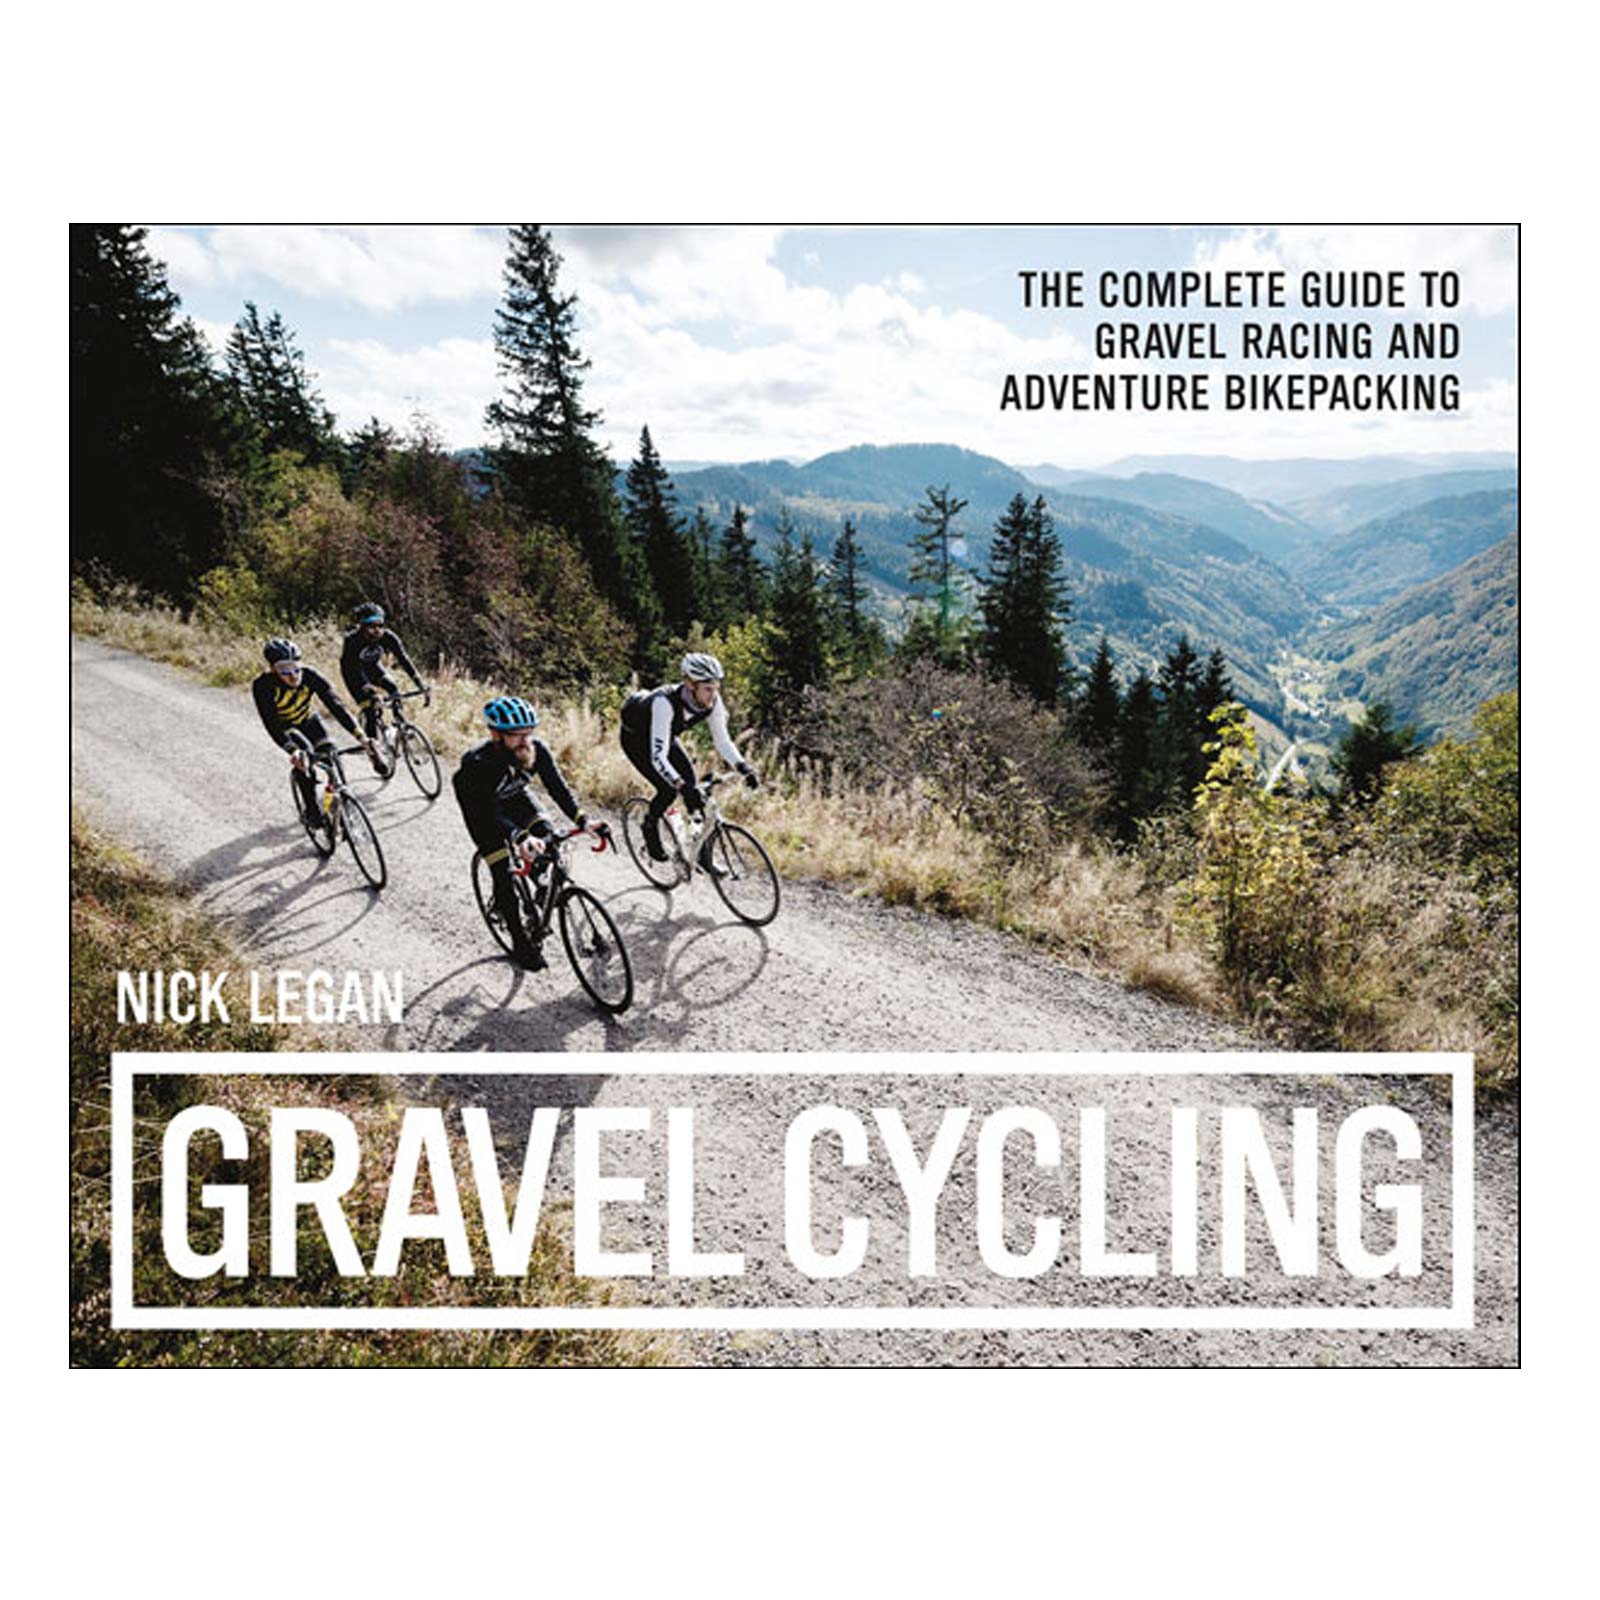 Gravel Cycling by Nick Legan - A Complete Guide to Gravel Racing and Bikepacking